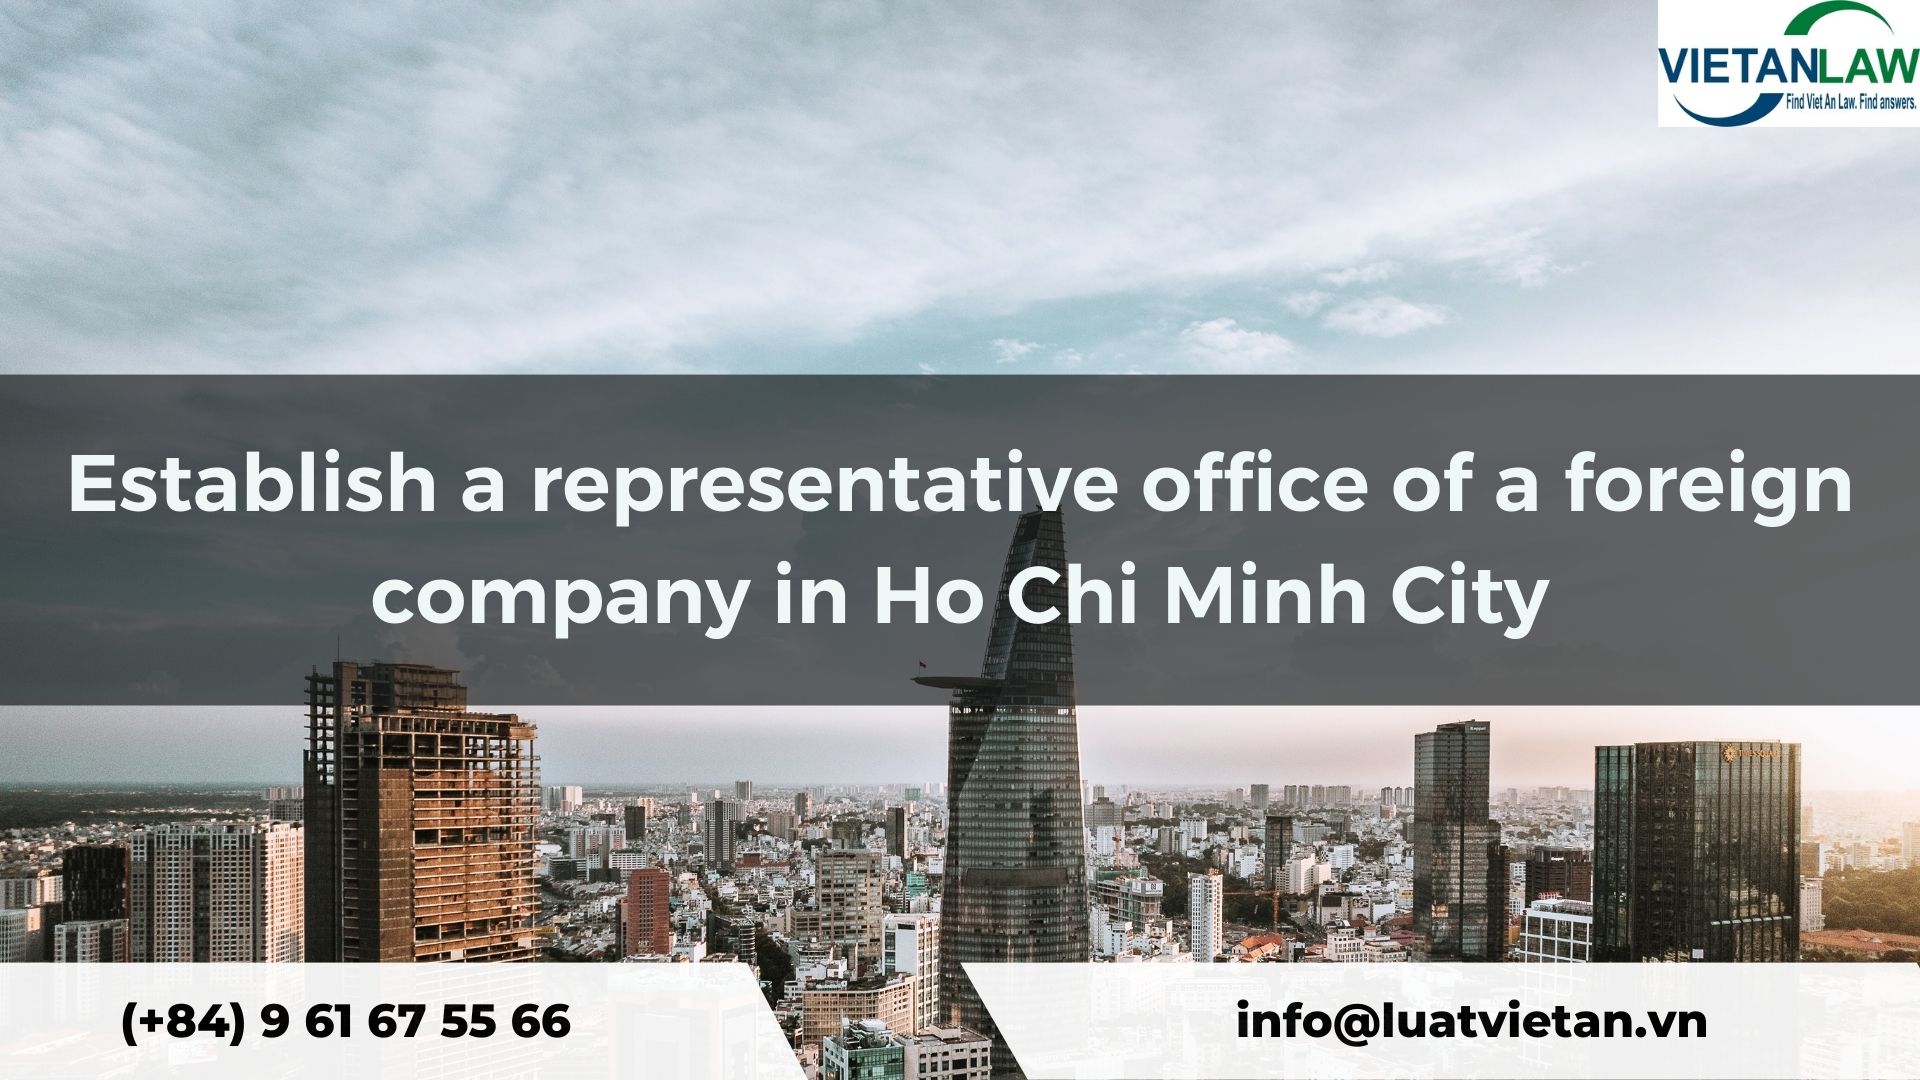 Establish a representative office of a foreign company in Ho Chi Minh City